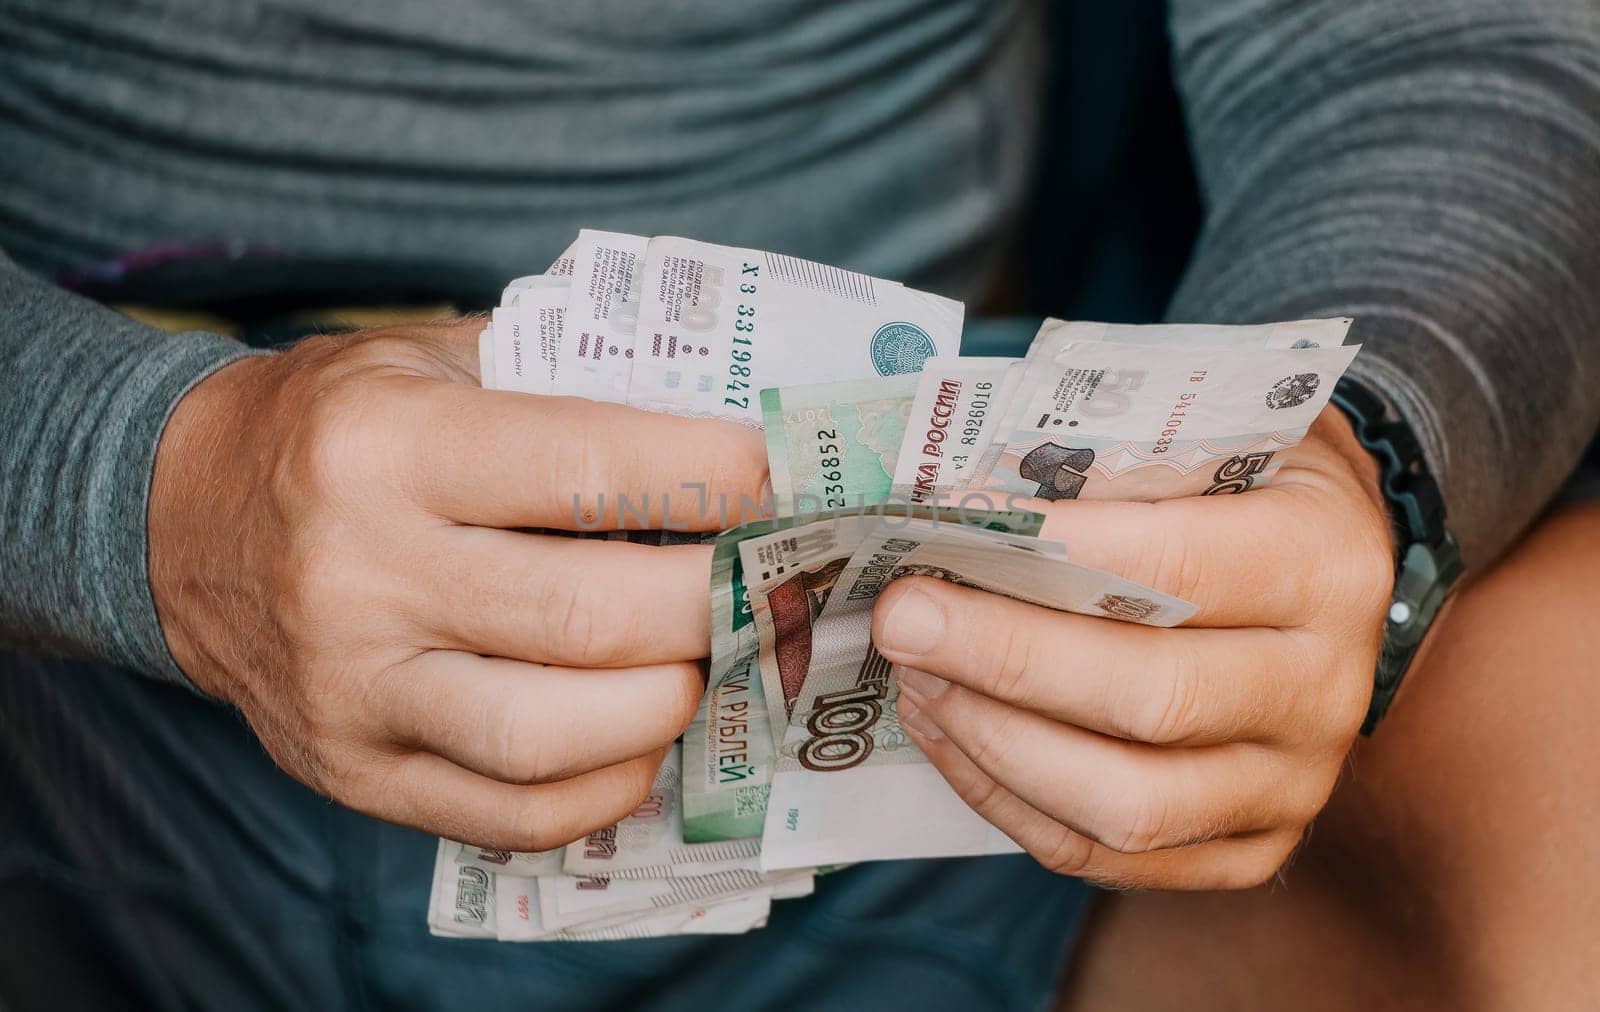 Man hands counting money, close-up. Financial literacy concept, counting paper banknotes, Russian rubles. Unrecognizable person, male hands, outdoor scene by panophotograph